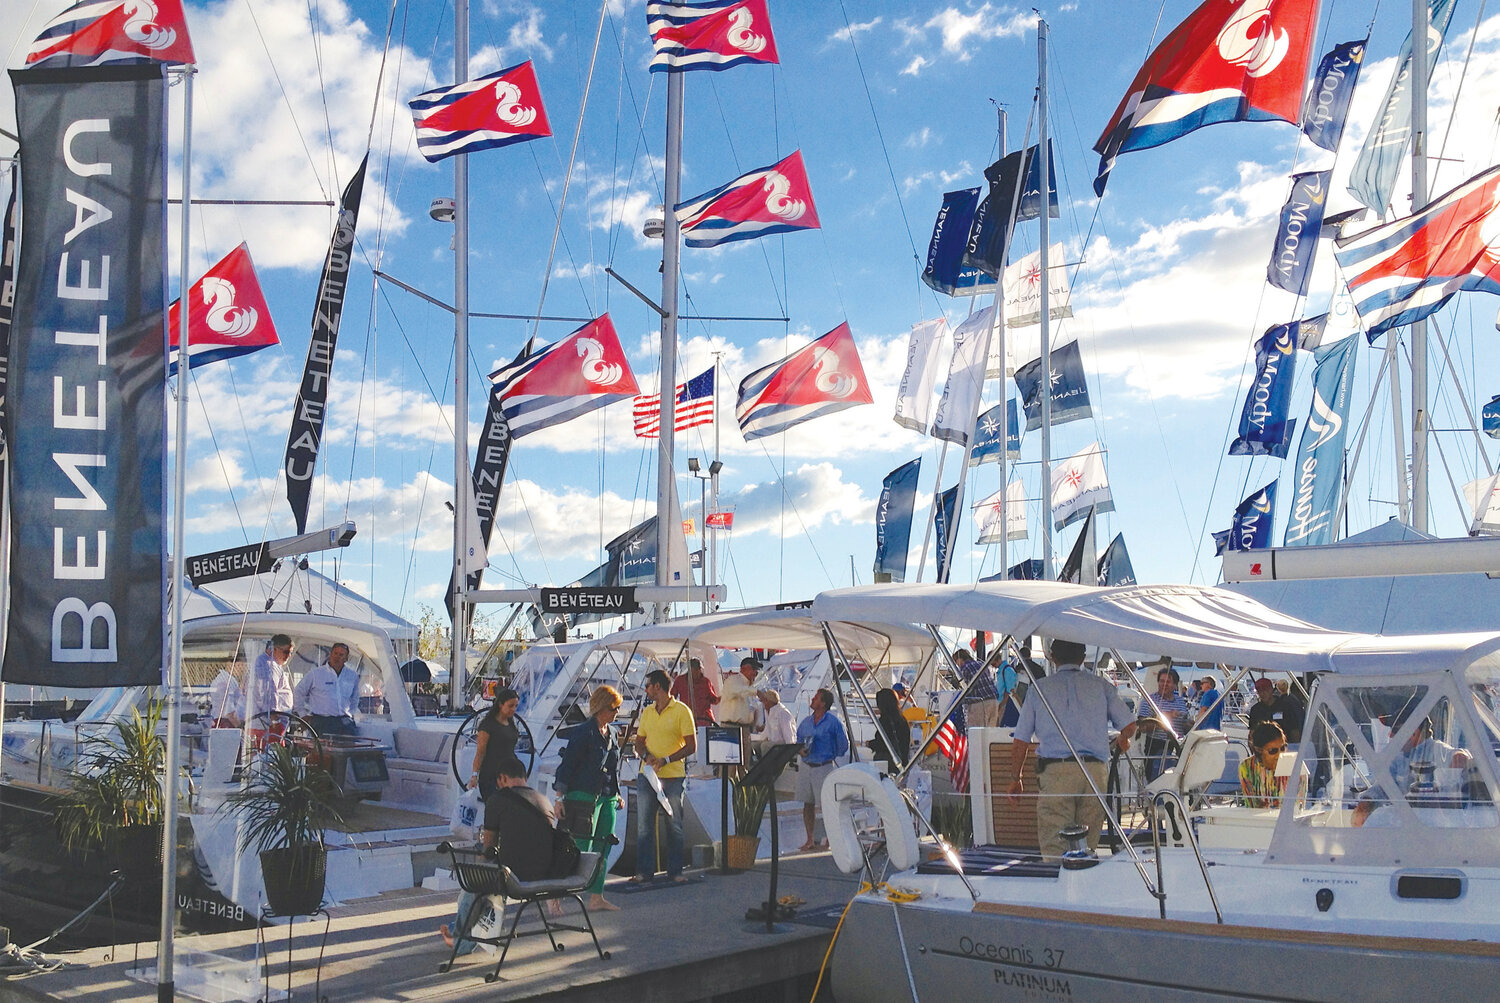 Newport International Boat Show, held at the Newport Yachting Center